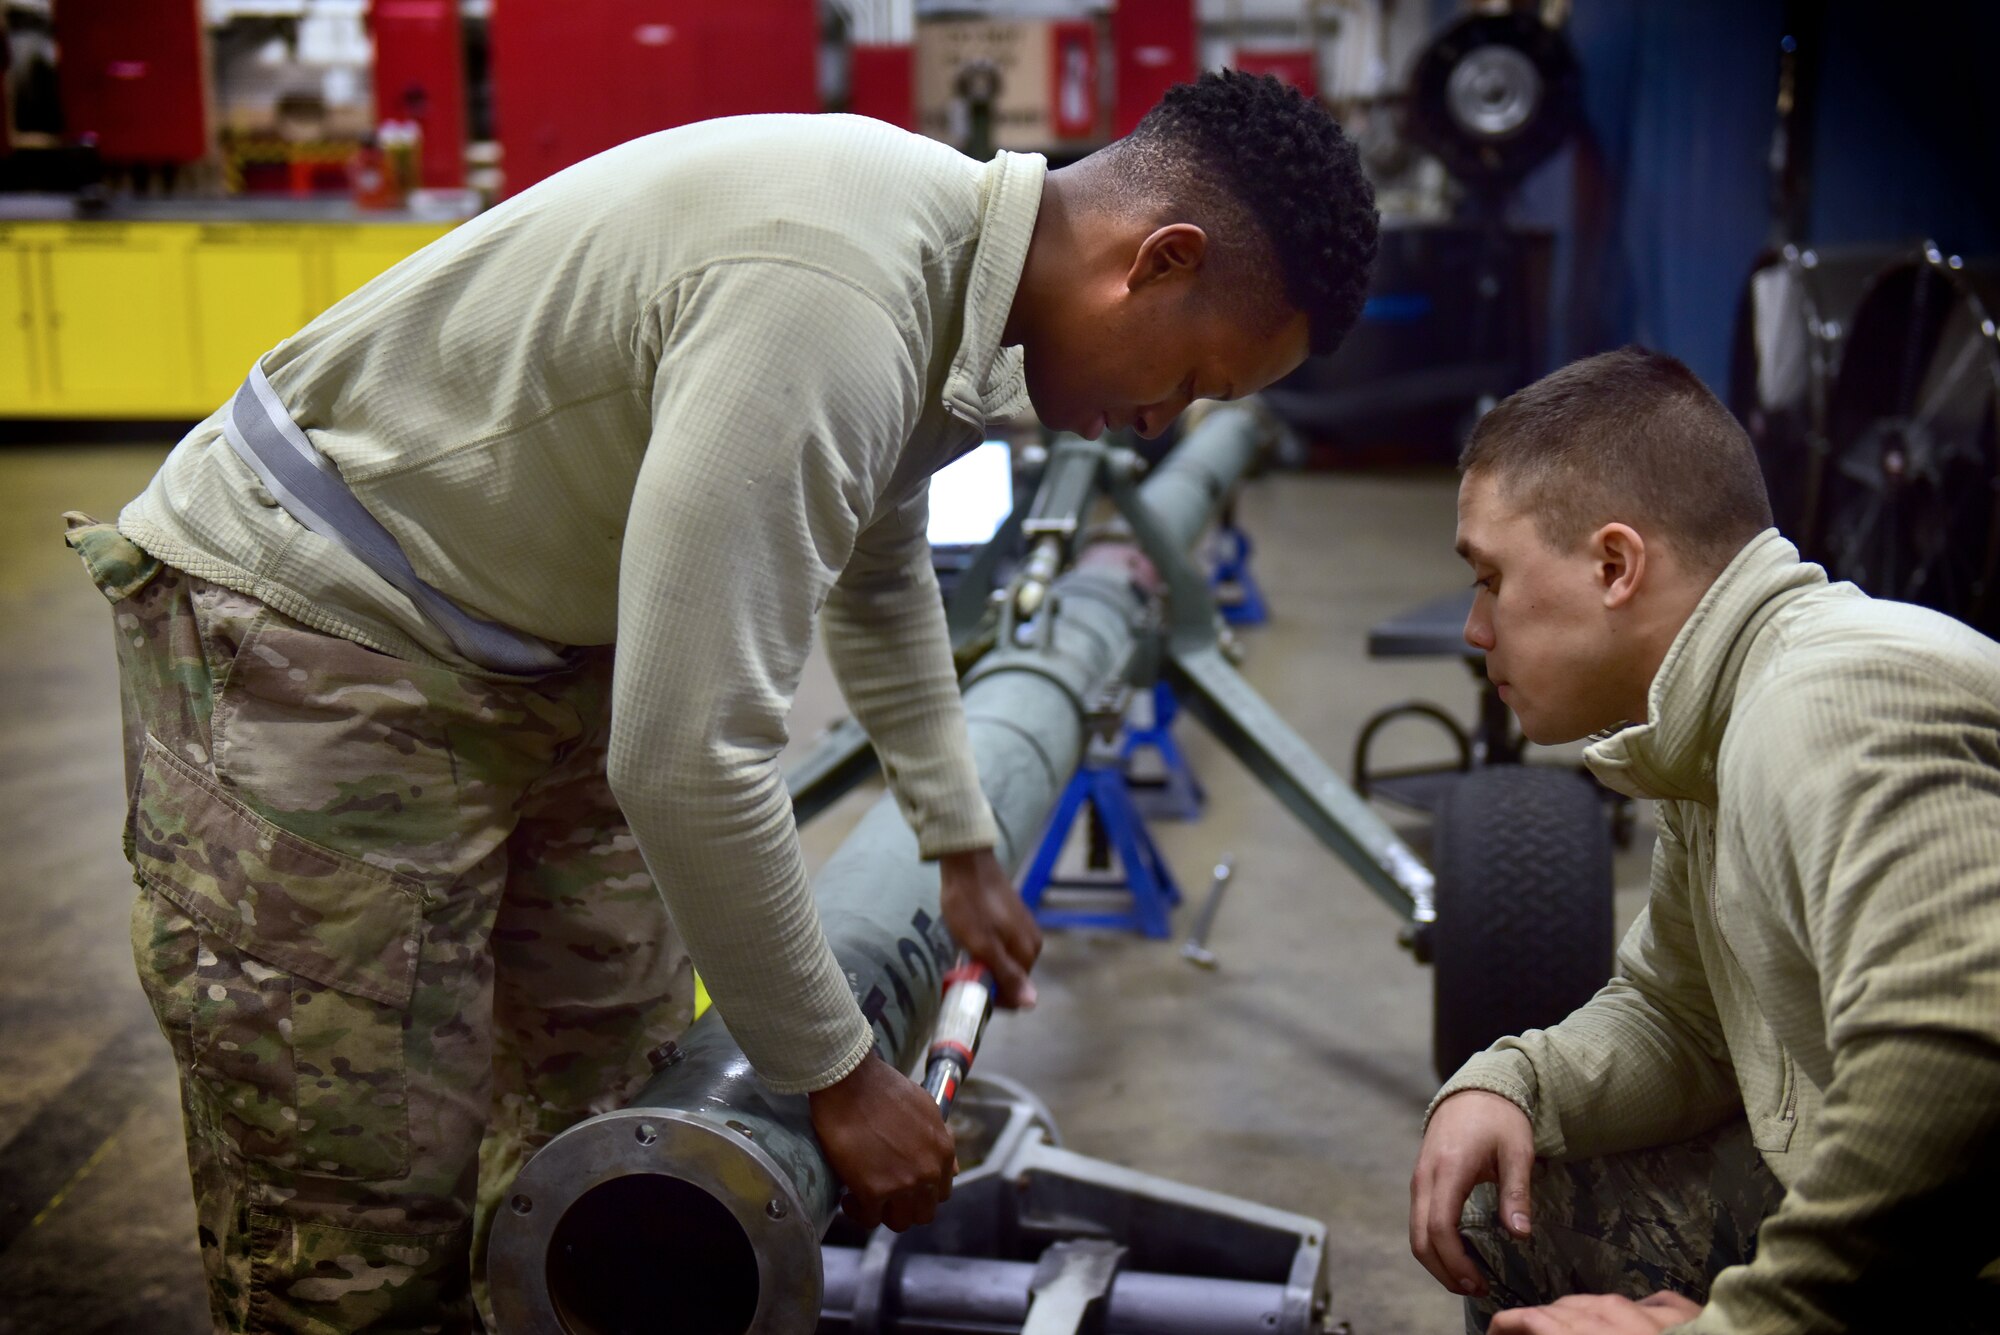 Two men look over a piece of equipment.